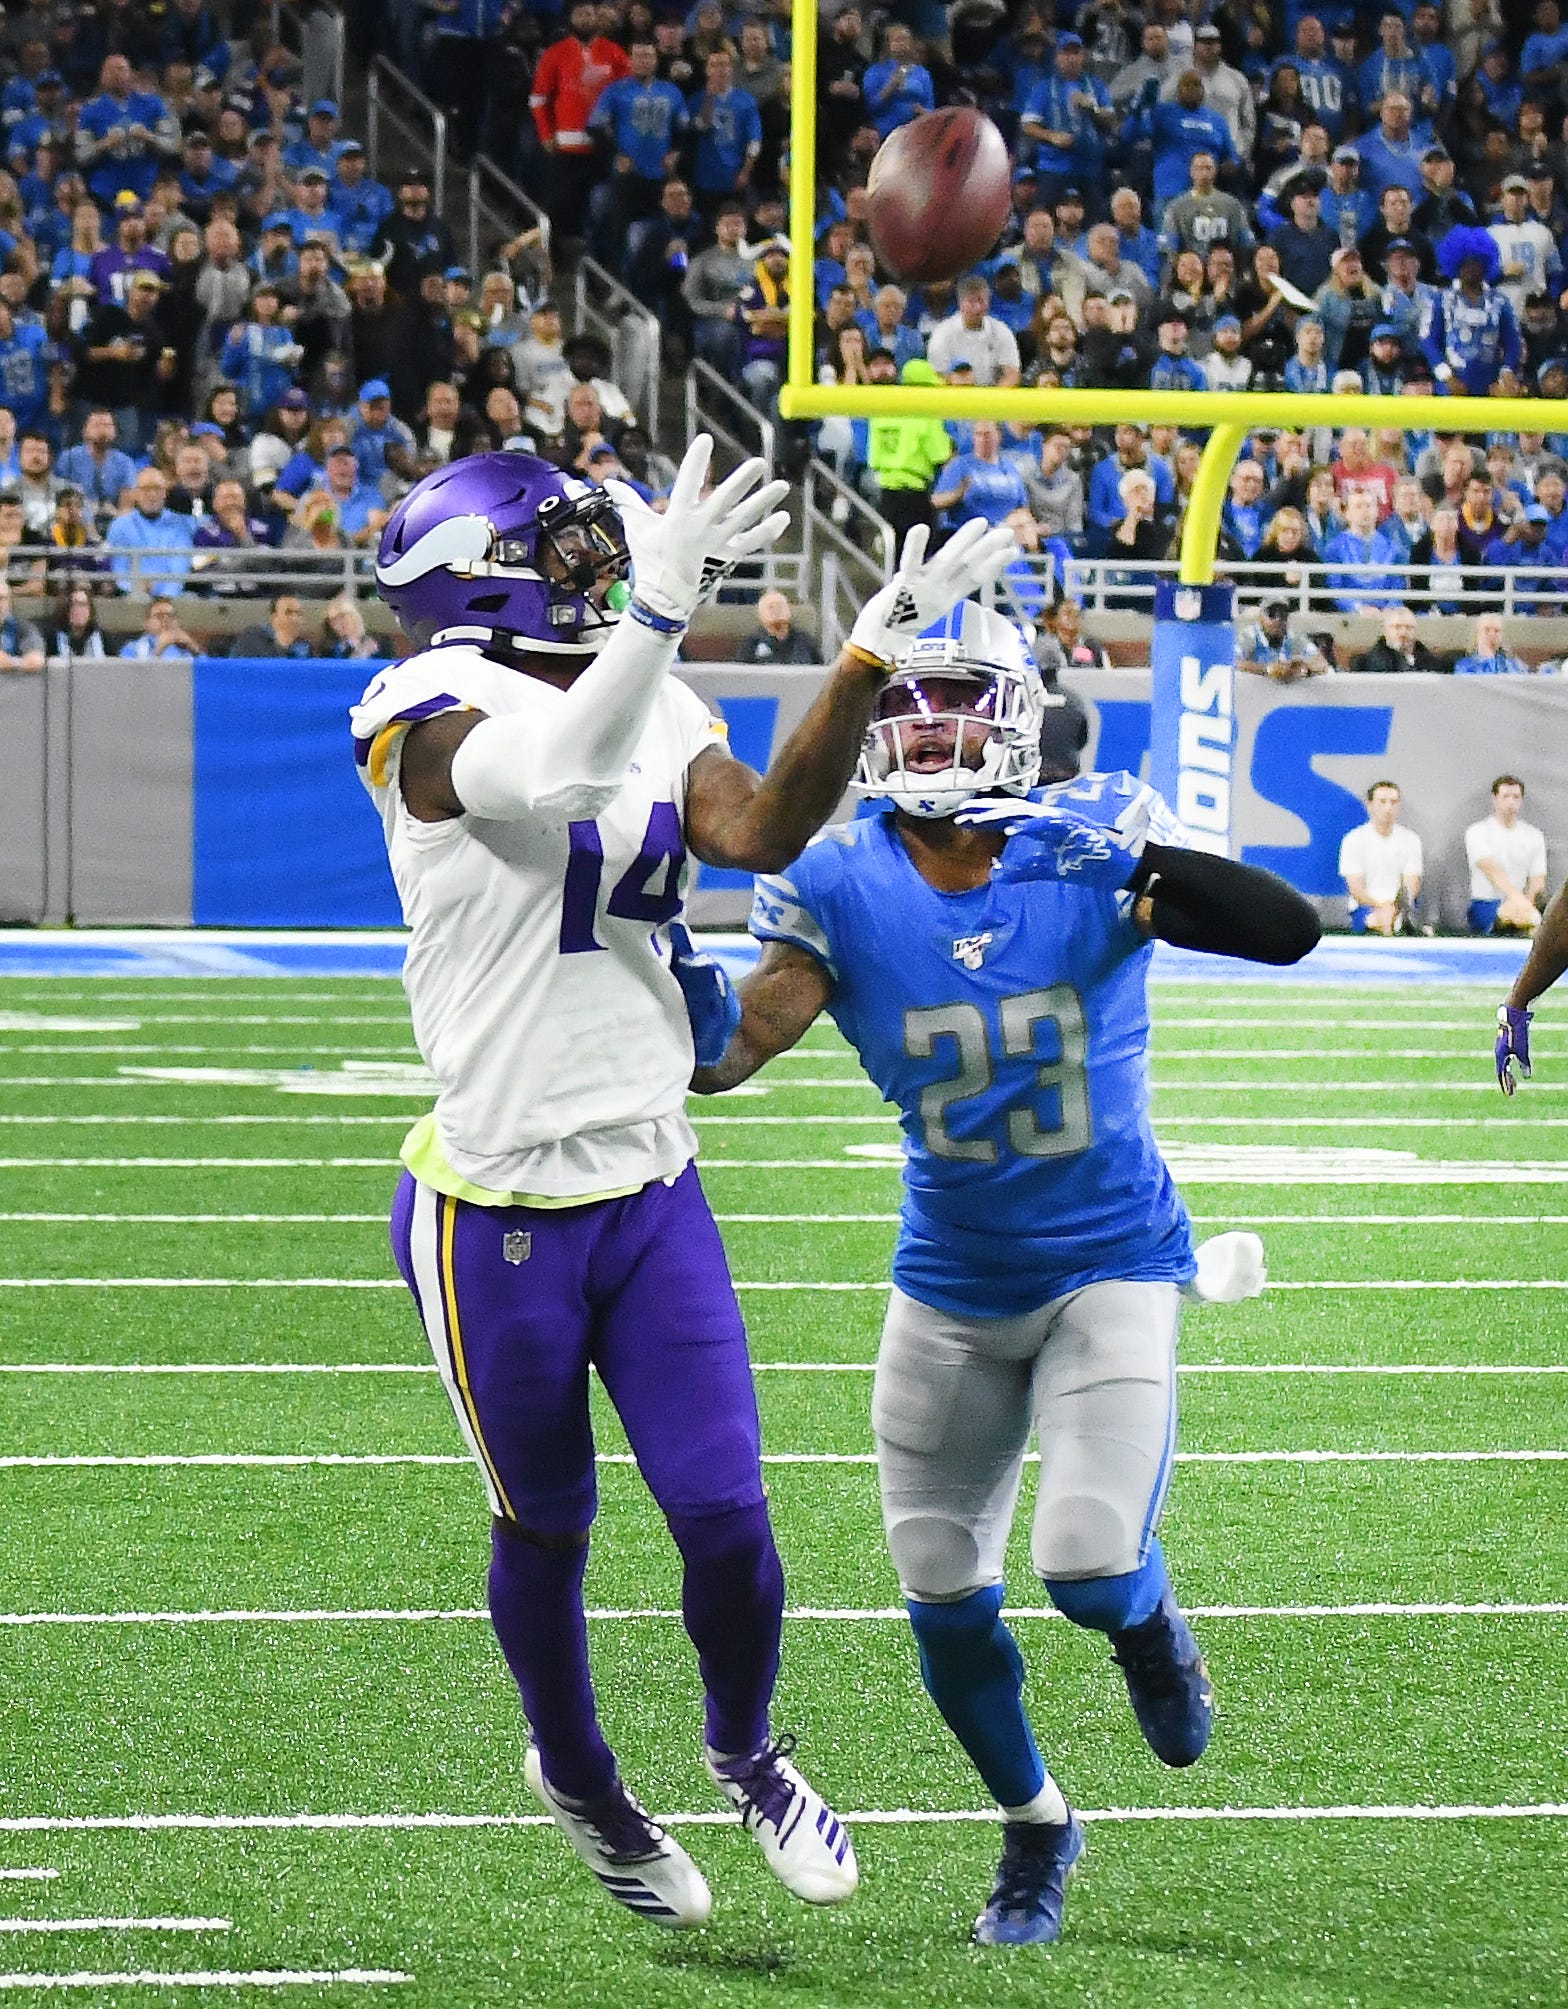 Vikings' Stefon Diggs gets ahead of Lions' Darius Slay for a completion in the second quarter.